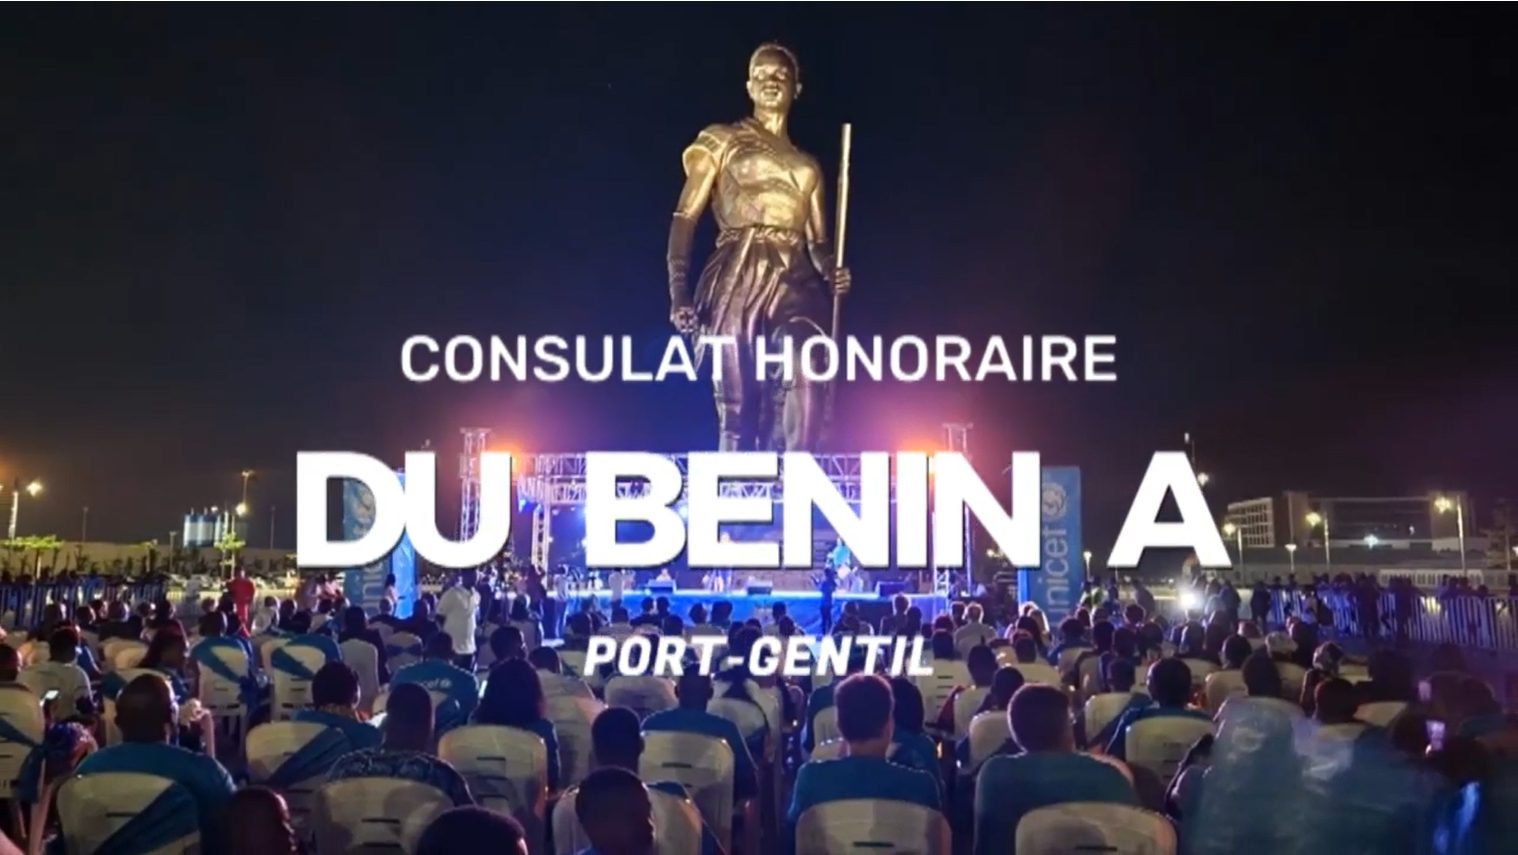 Honorary Consulate of Benin in Port-Gentil